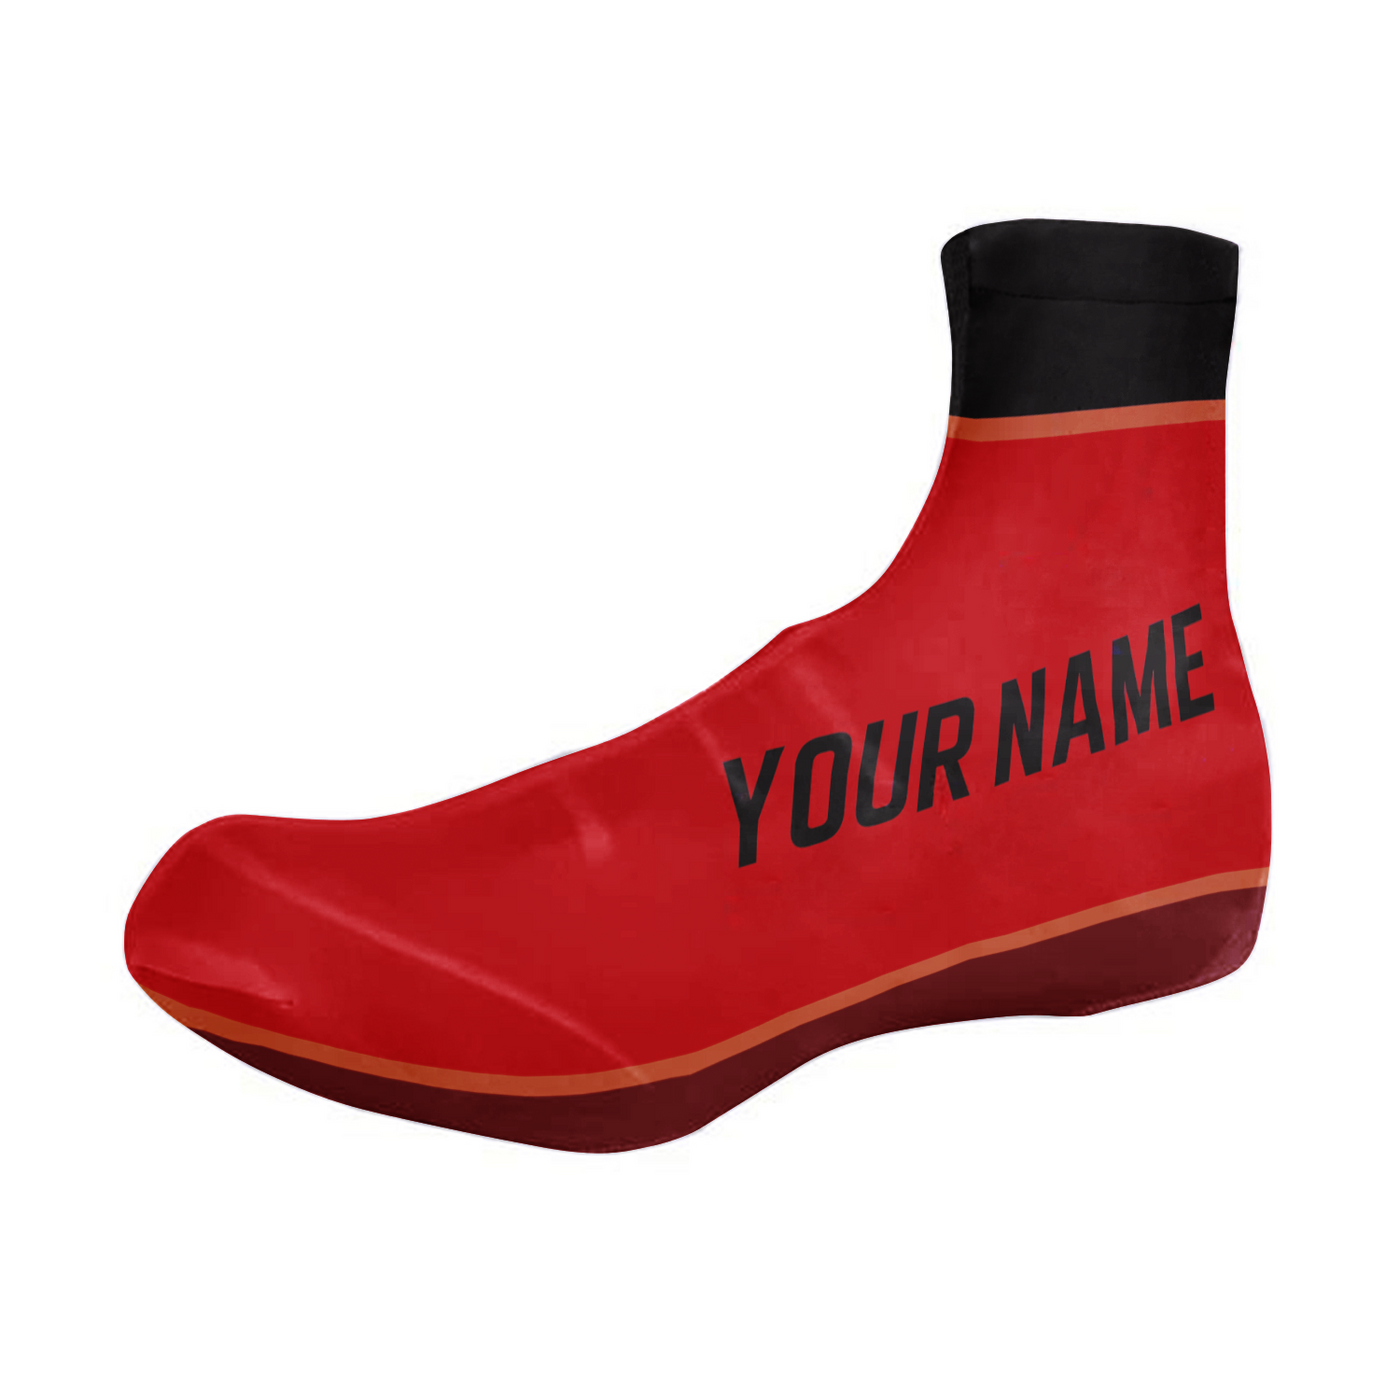 Customized Tampa Bay Team Cycling Shoe Covers